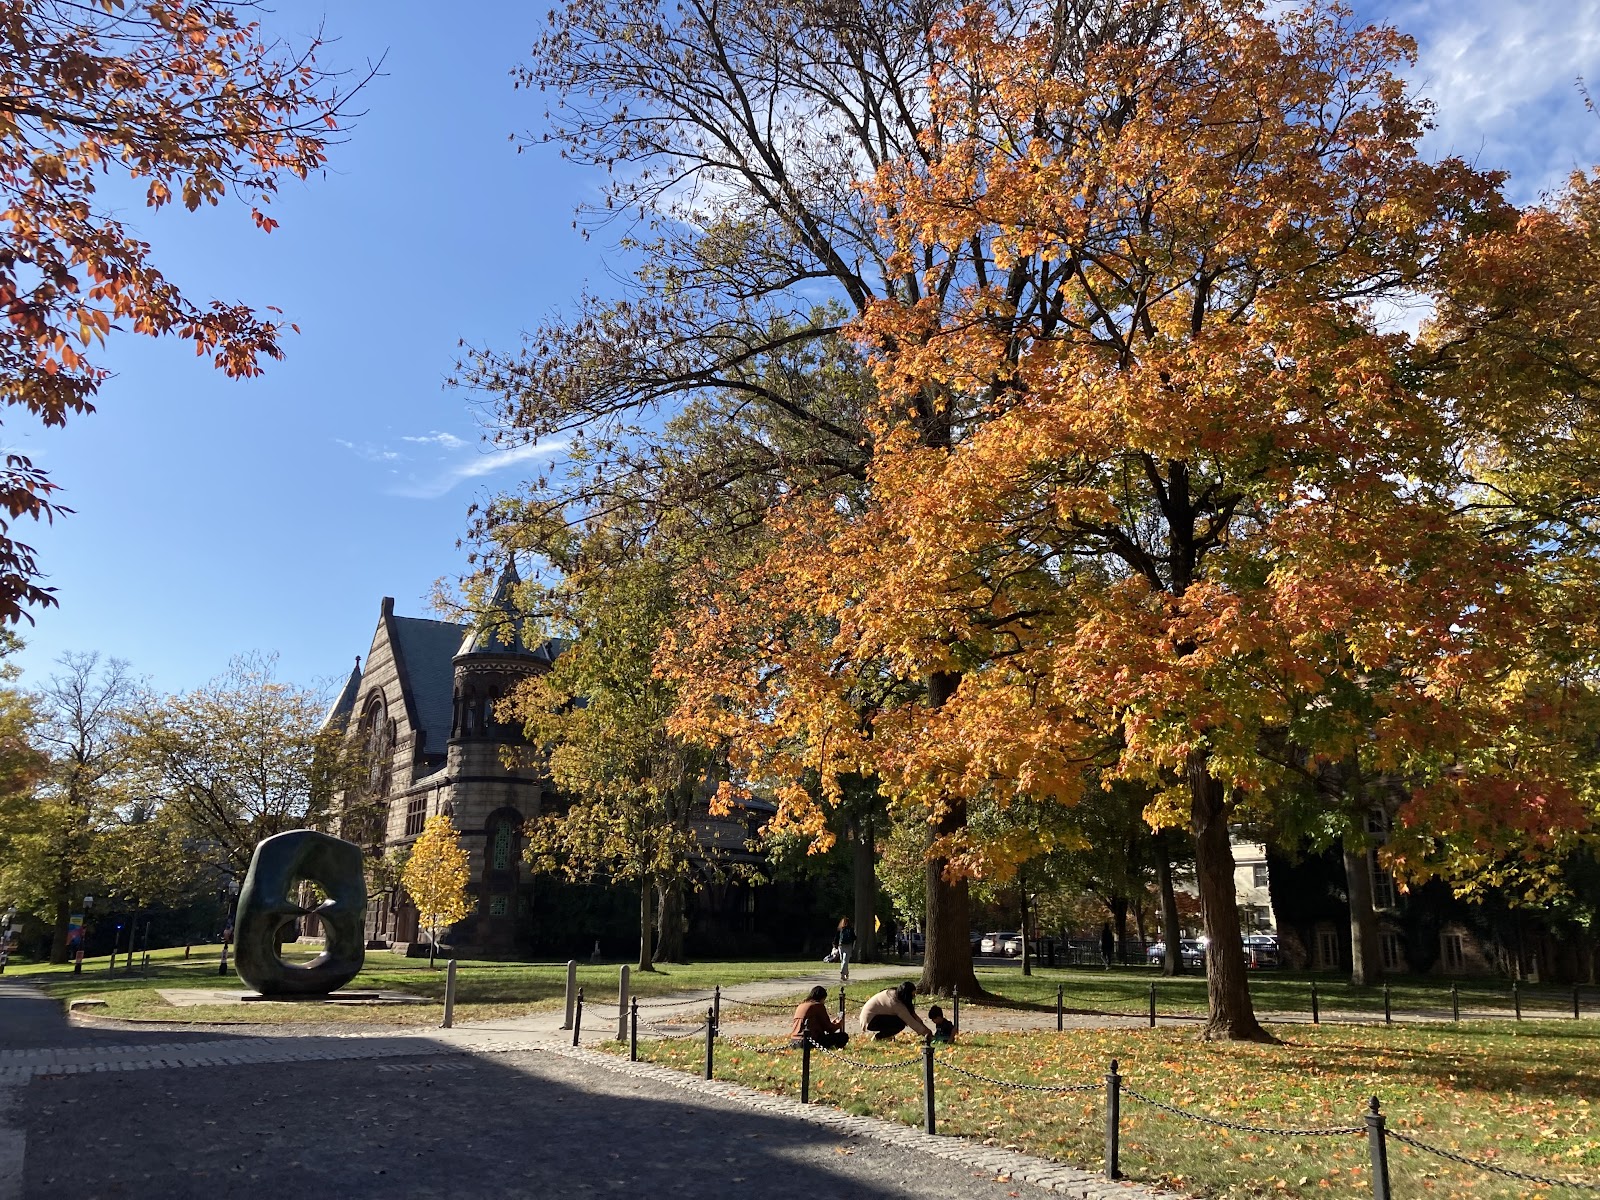 Fall foliage appears on trees surrounding Richardson Hall and Oval With Points sculpture